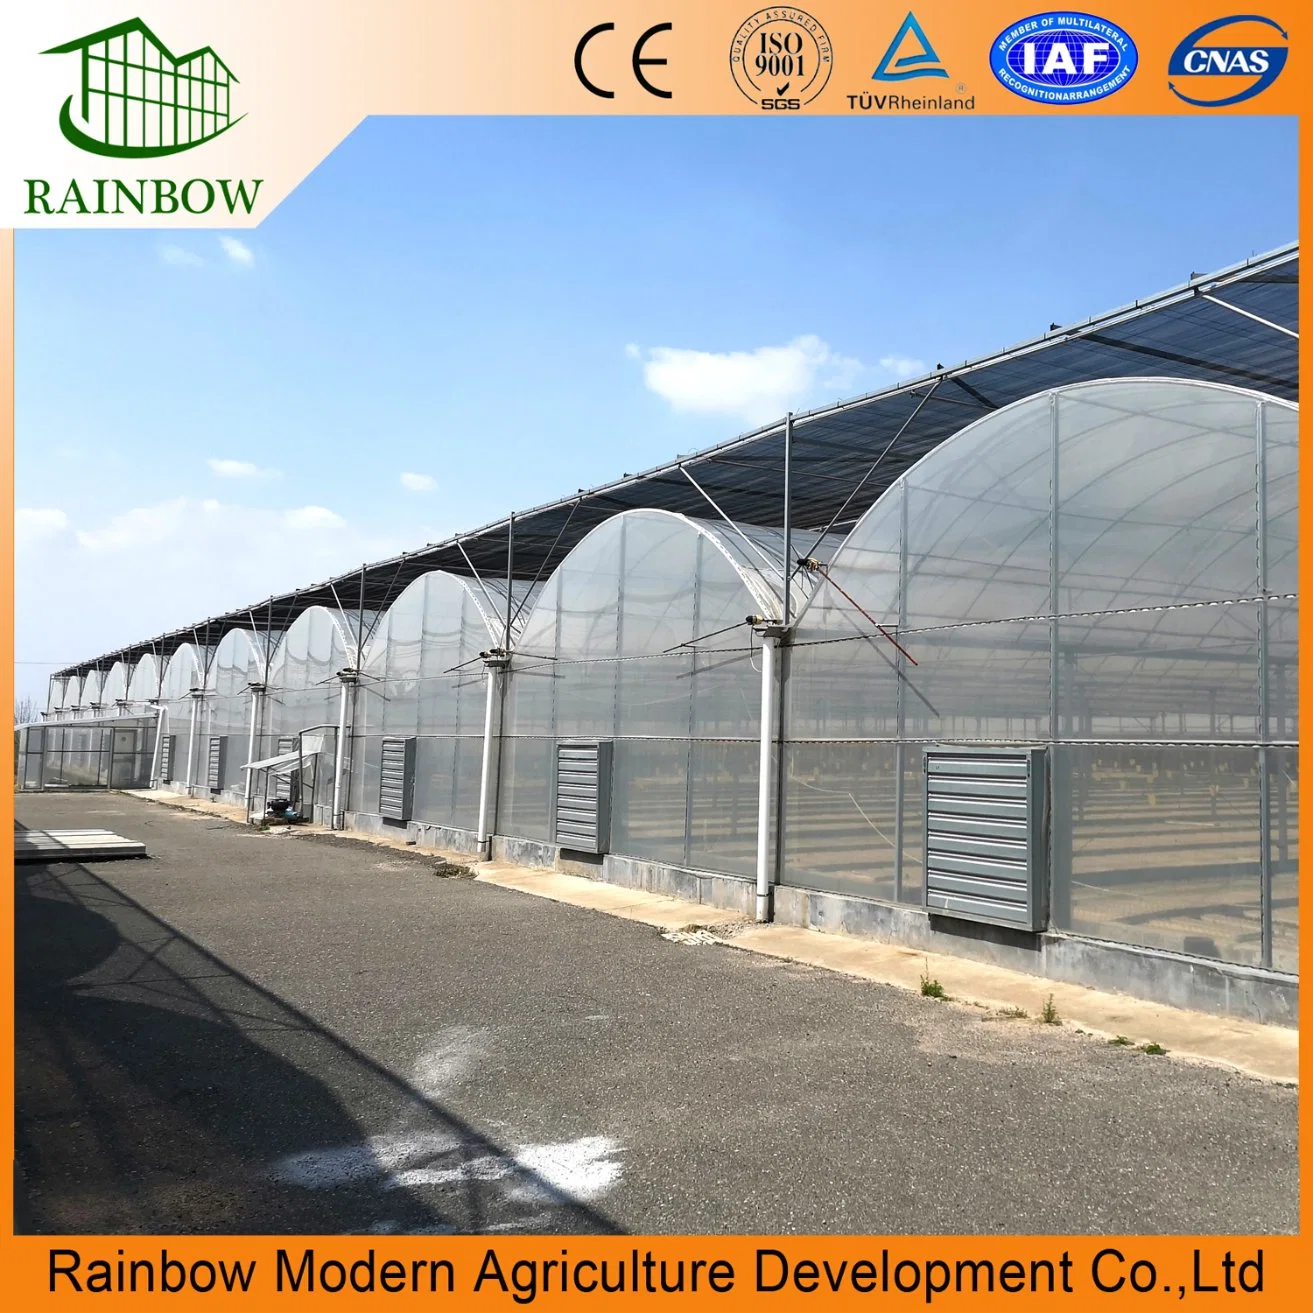 Smart Multi-Span Tunnel / Arch Type PE / Po Film Plastic Agriculture / Commercial Eco Greenhouse for Tomato/ Cucumber Strawberry with Hydroponics Growing System